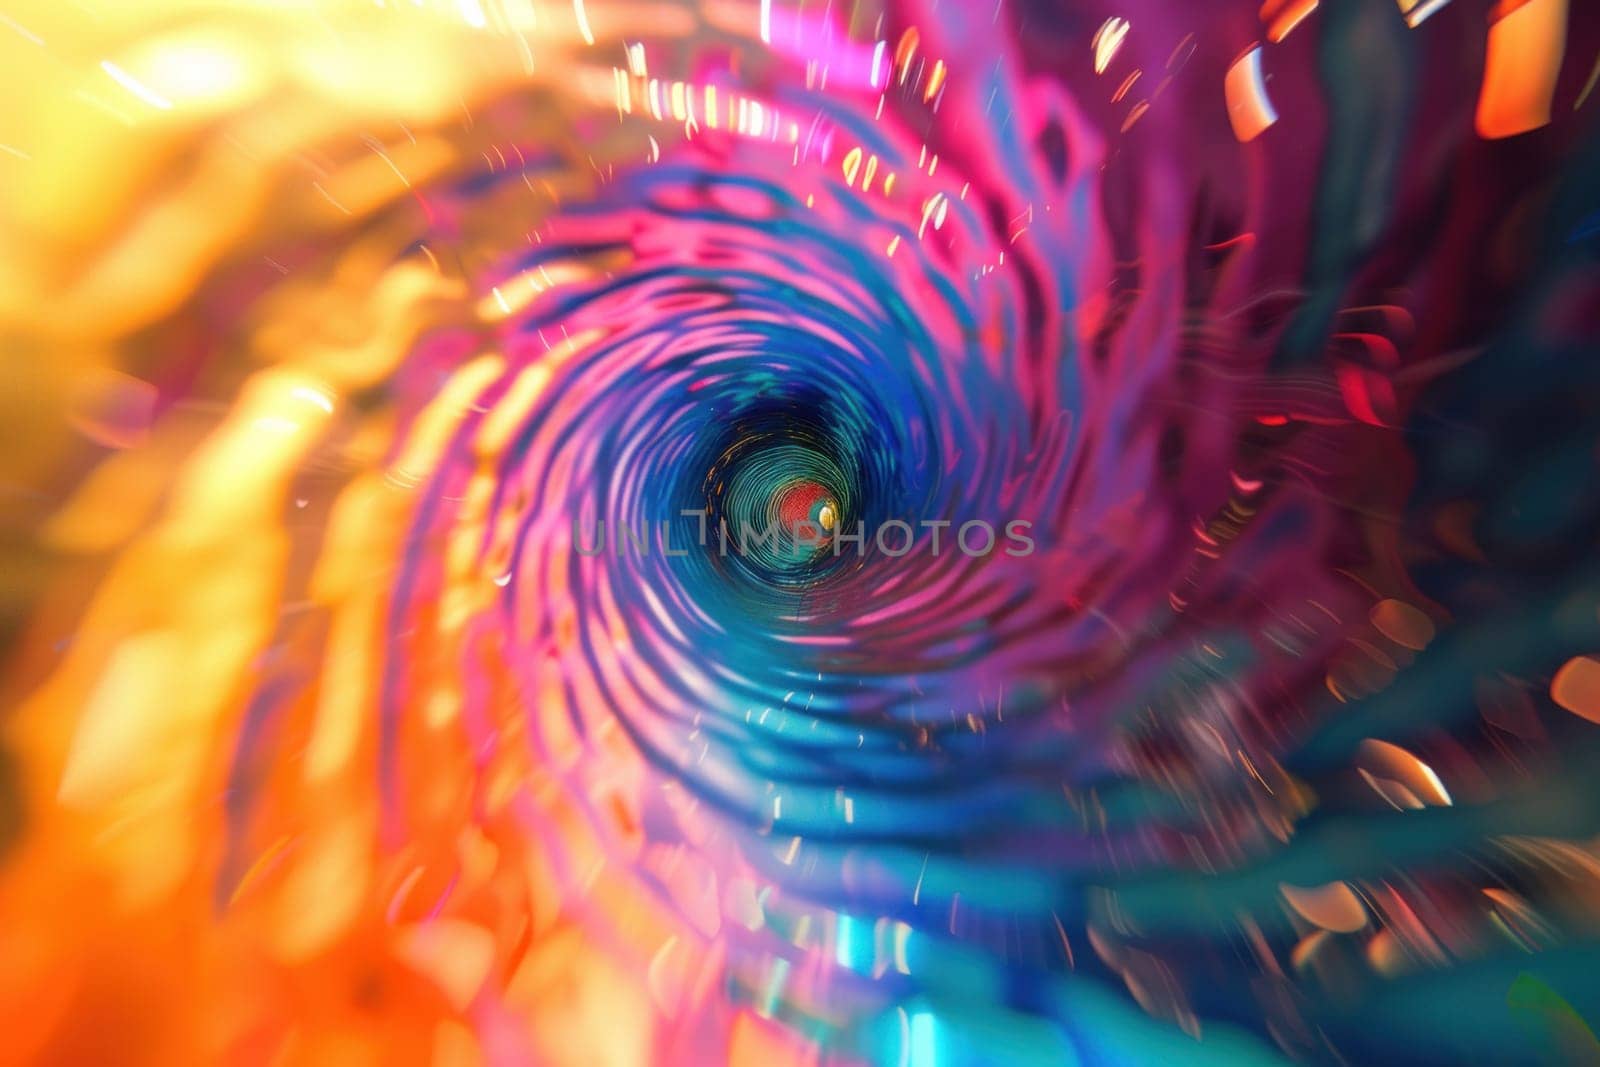 A colorful spiral with a rainbow of colors.